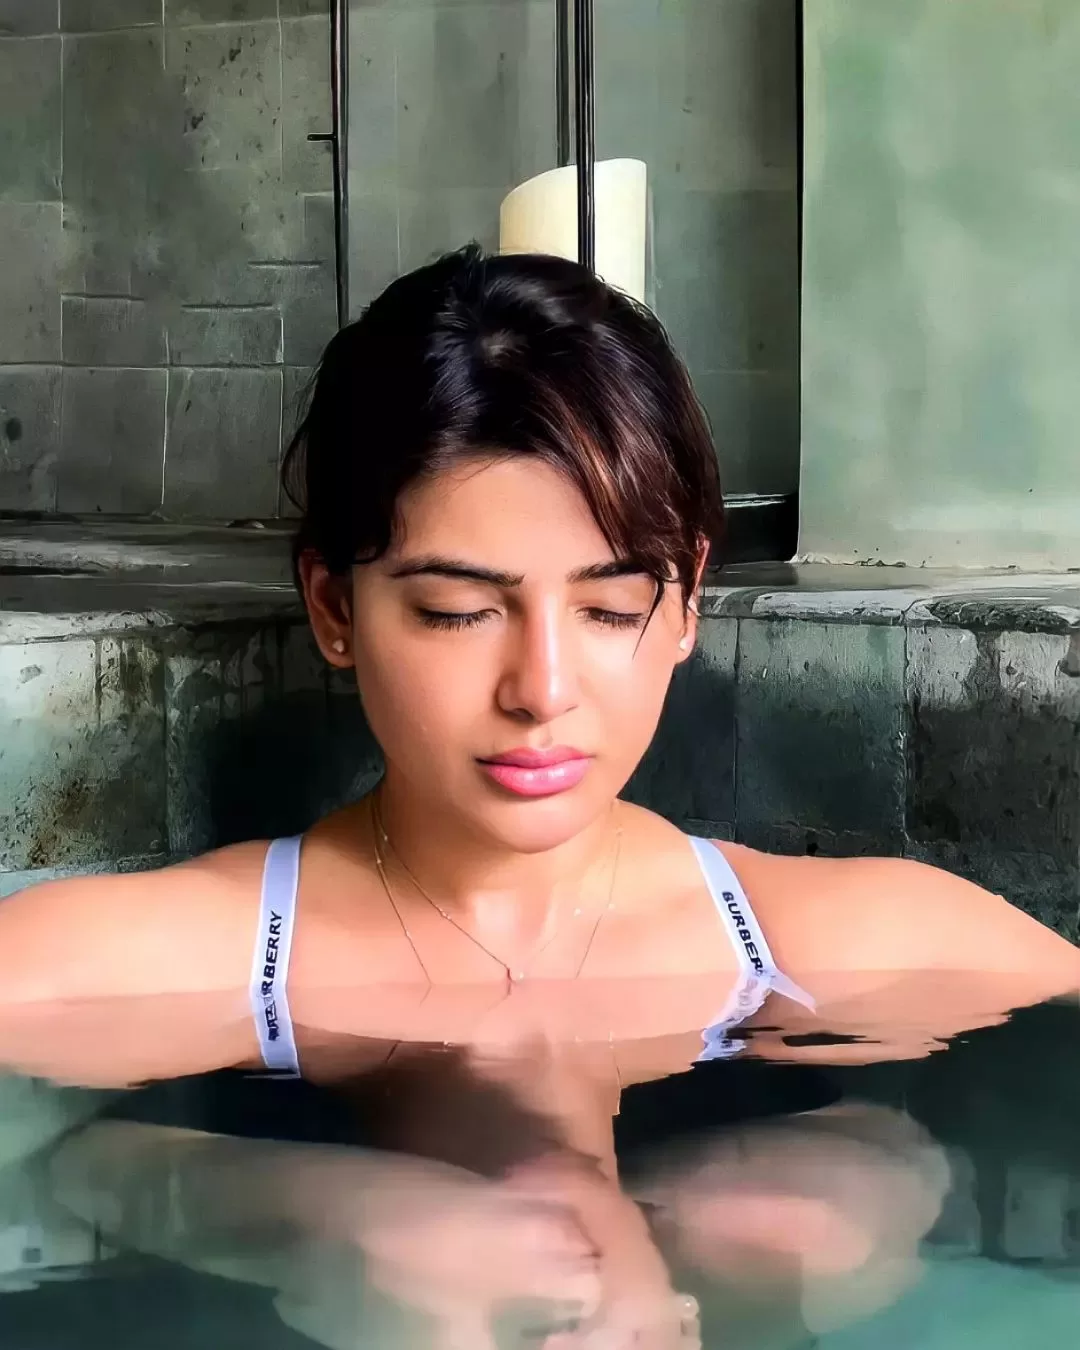 Photo by Q ᴜ ᴇ ᴇ ɴ 🖤⃝💖〲 S ᴀ ᴍ ᴀ ɴ ᴛ ʜ ᴀ 👸🏻 in Samantha Ruth Prabhu with @samantharuthprabhuoffl and @samantharuthprabhuofflfans. May be an image of 1 person swimming shower and pool jpg